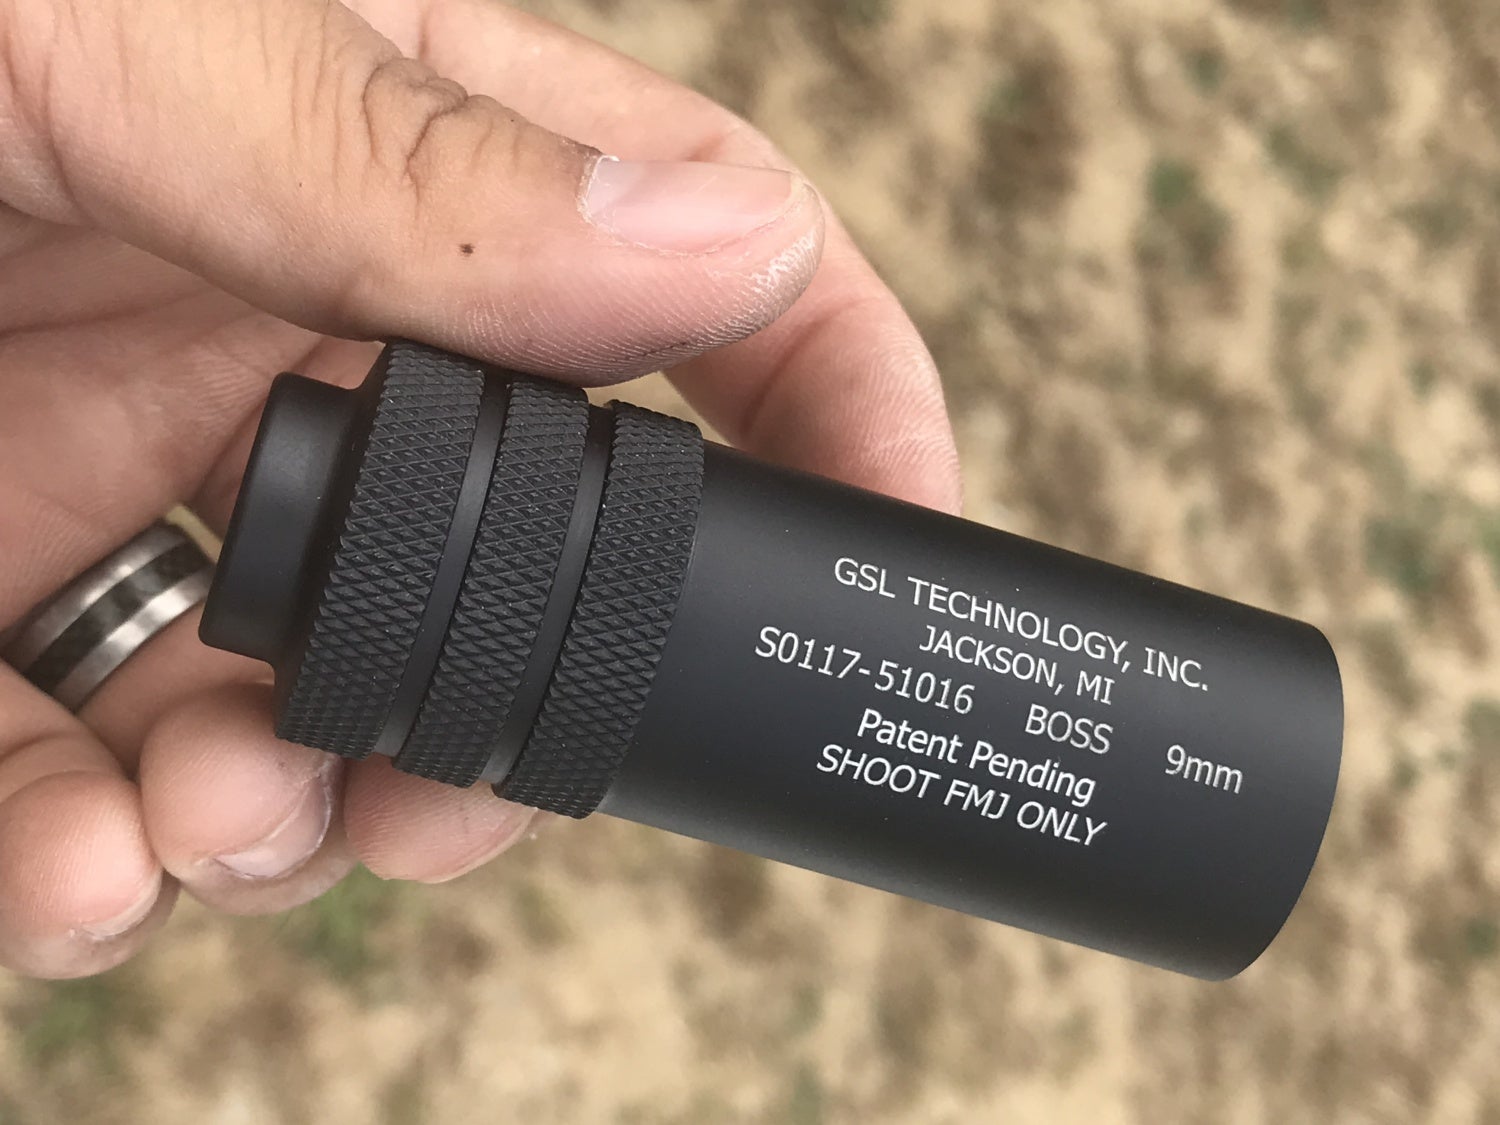 GSL Technology is coming out with their Boss emergency suppressor. 